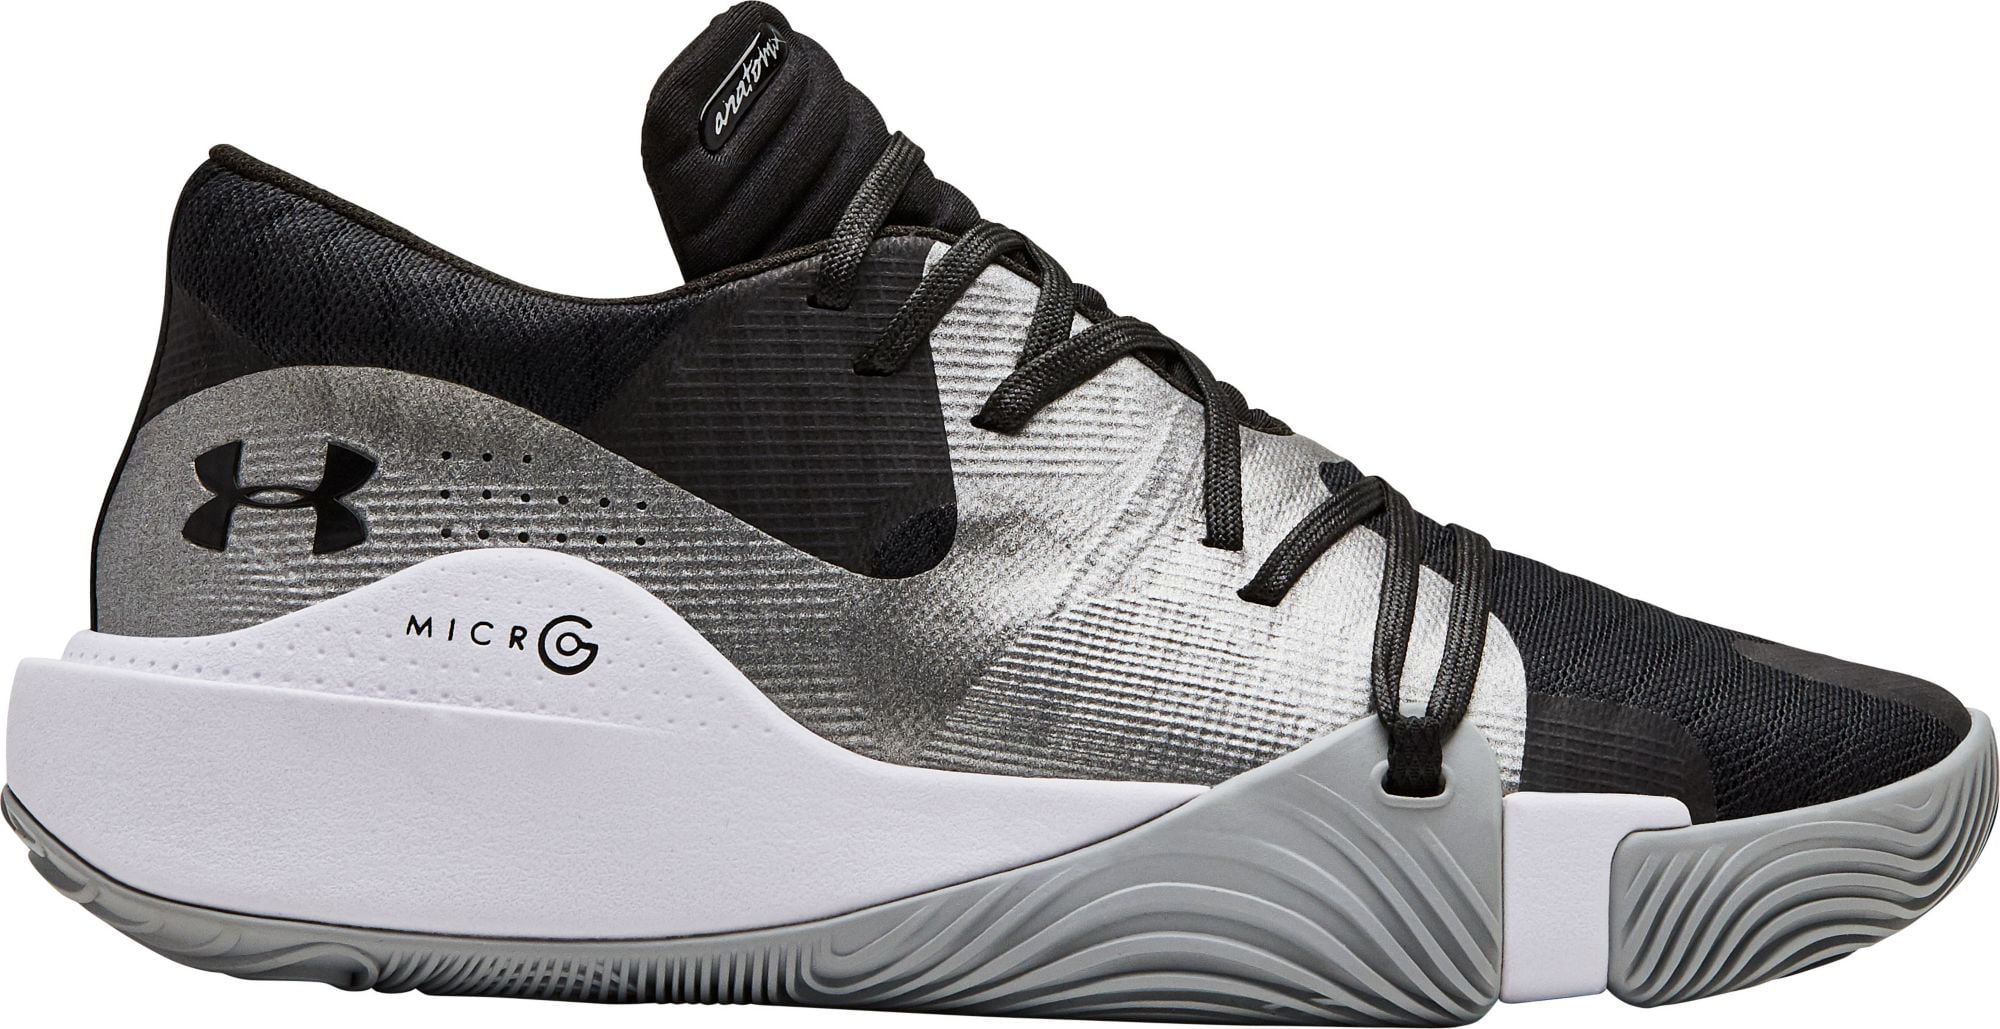 Under Armour - Under Armour Men's Spawn Low Basketball Shoes - Walmart